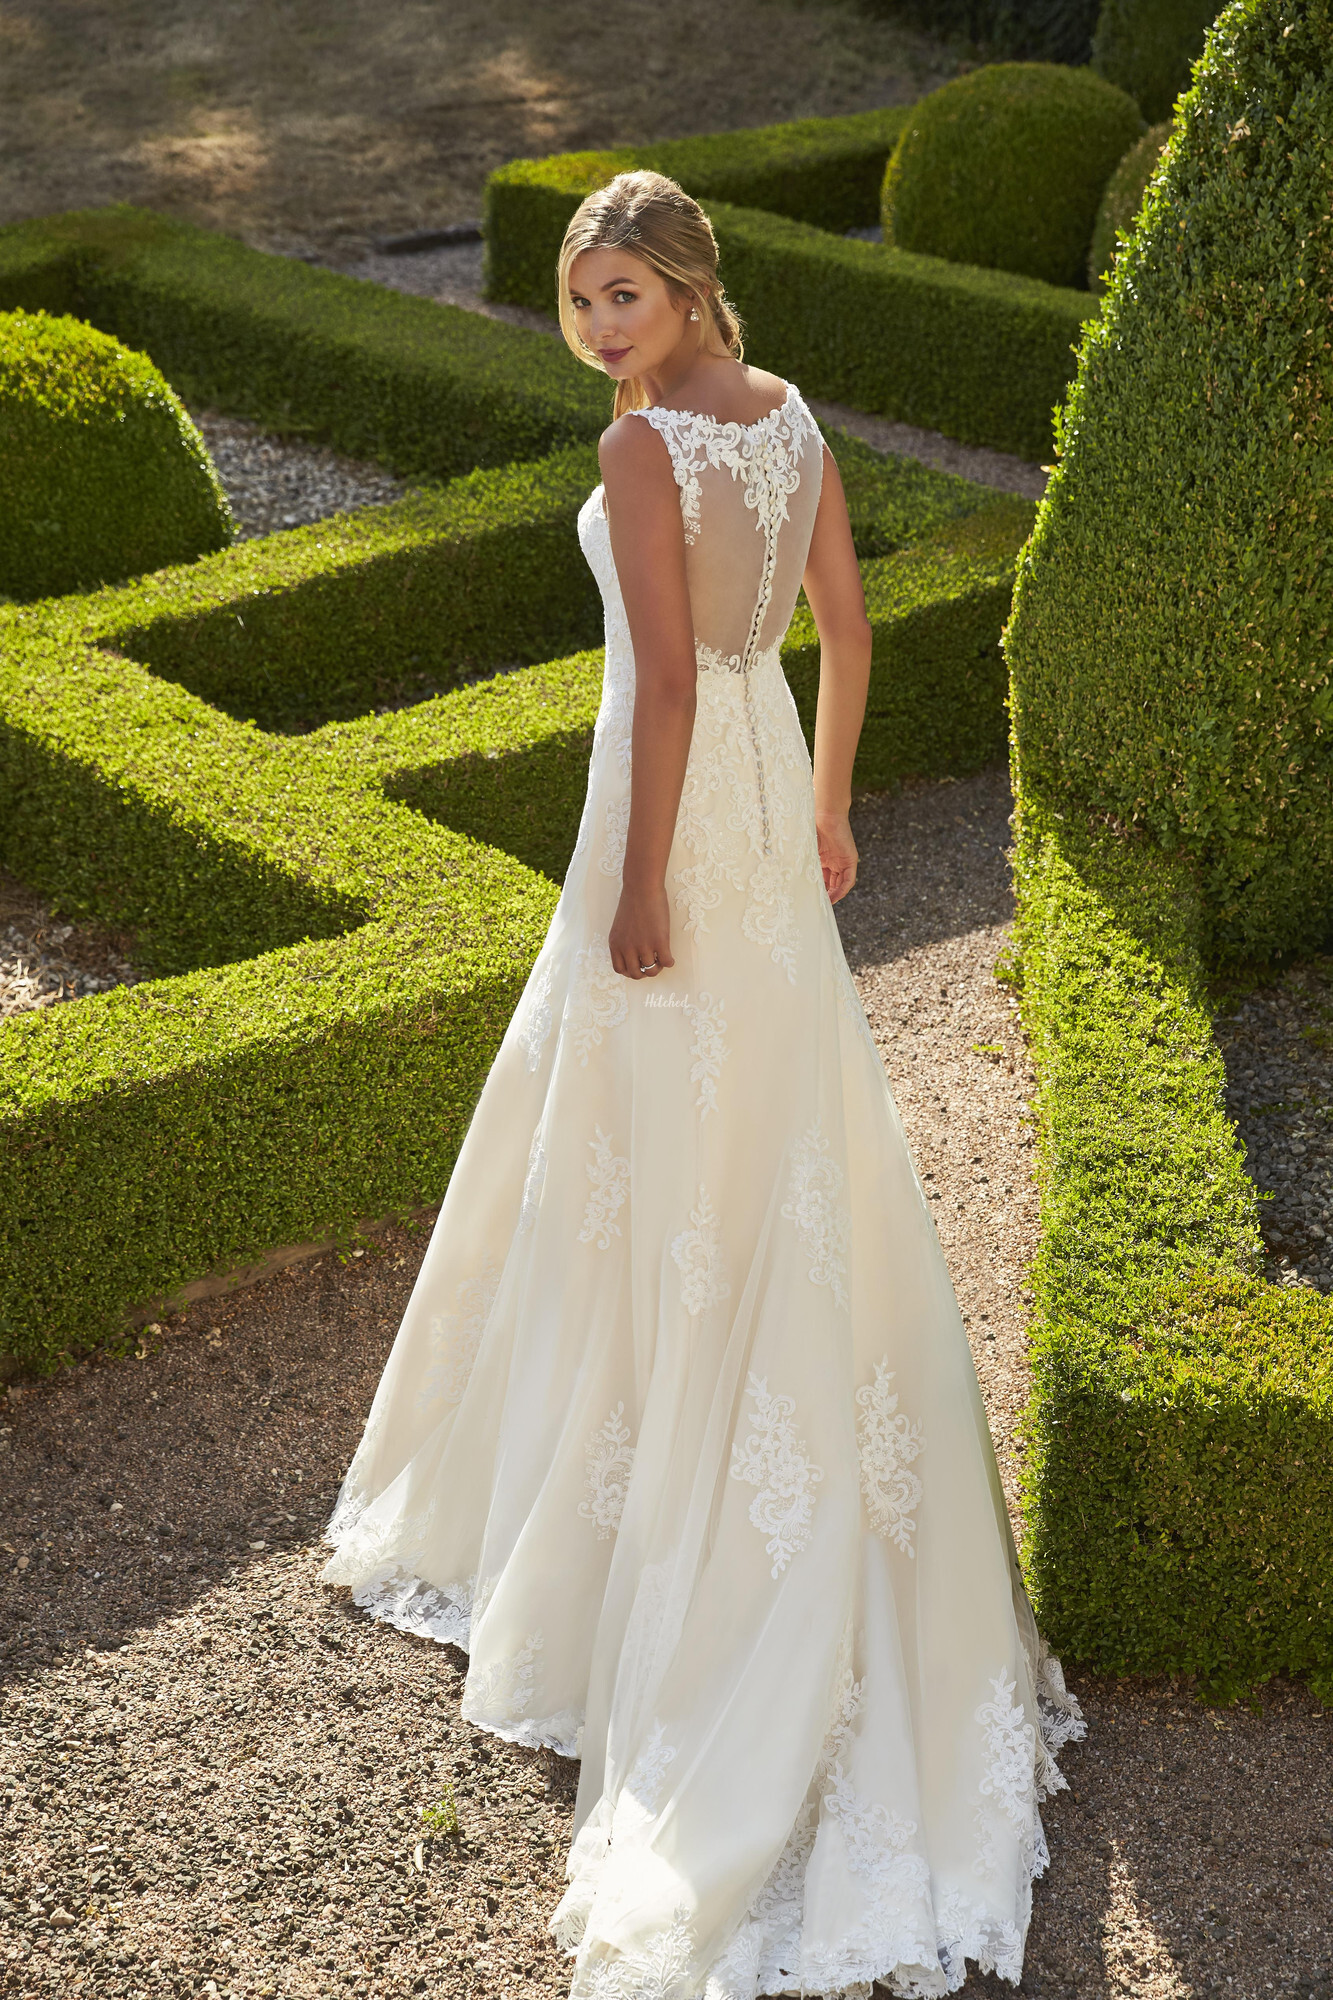 April Wedding Dress from Romantica - hitched.co.uk